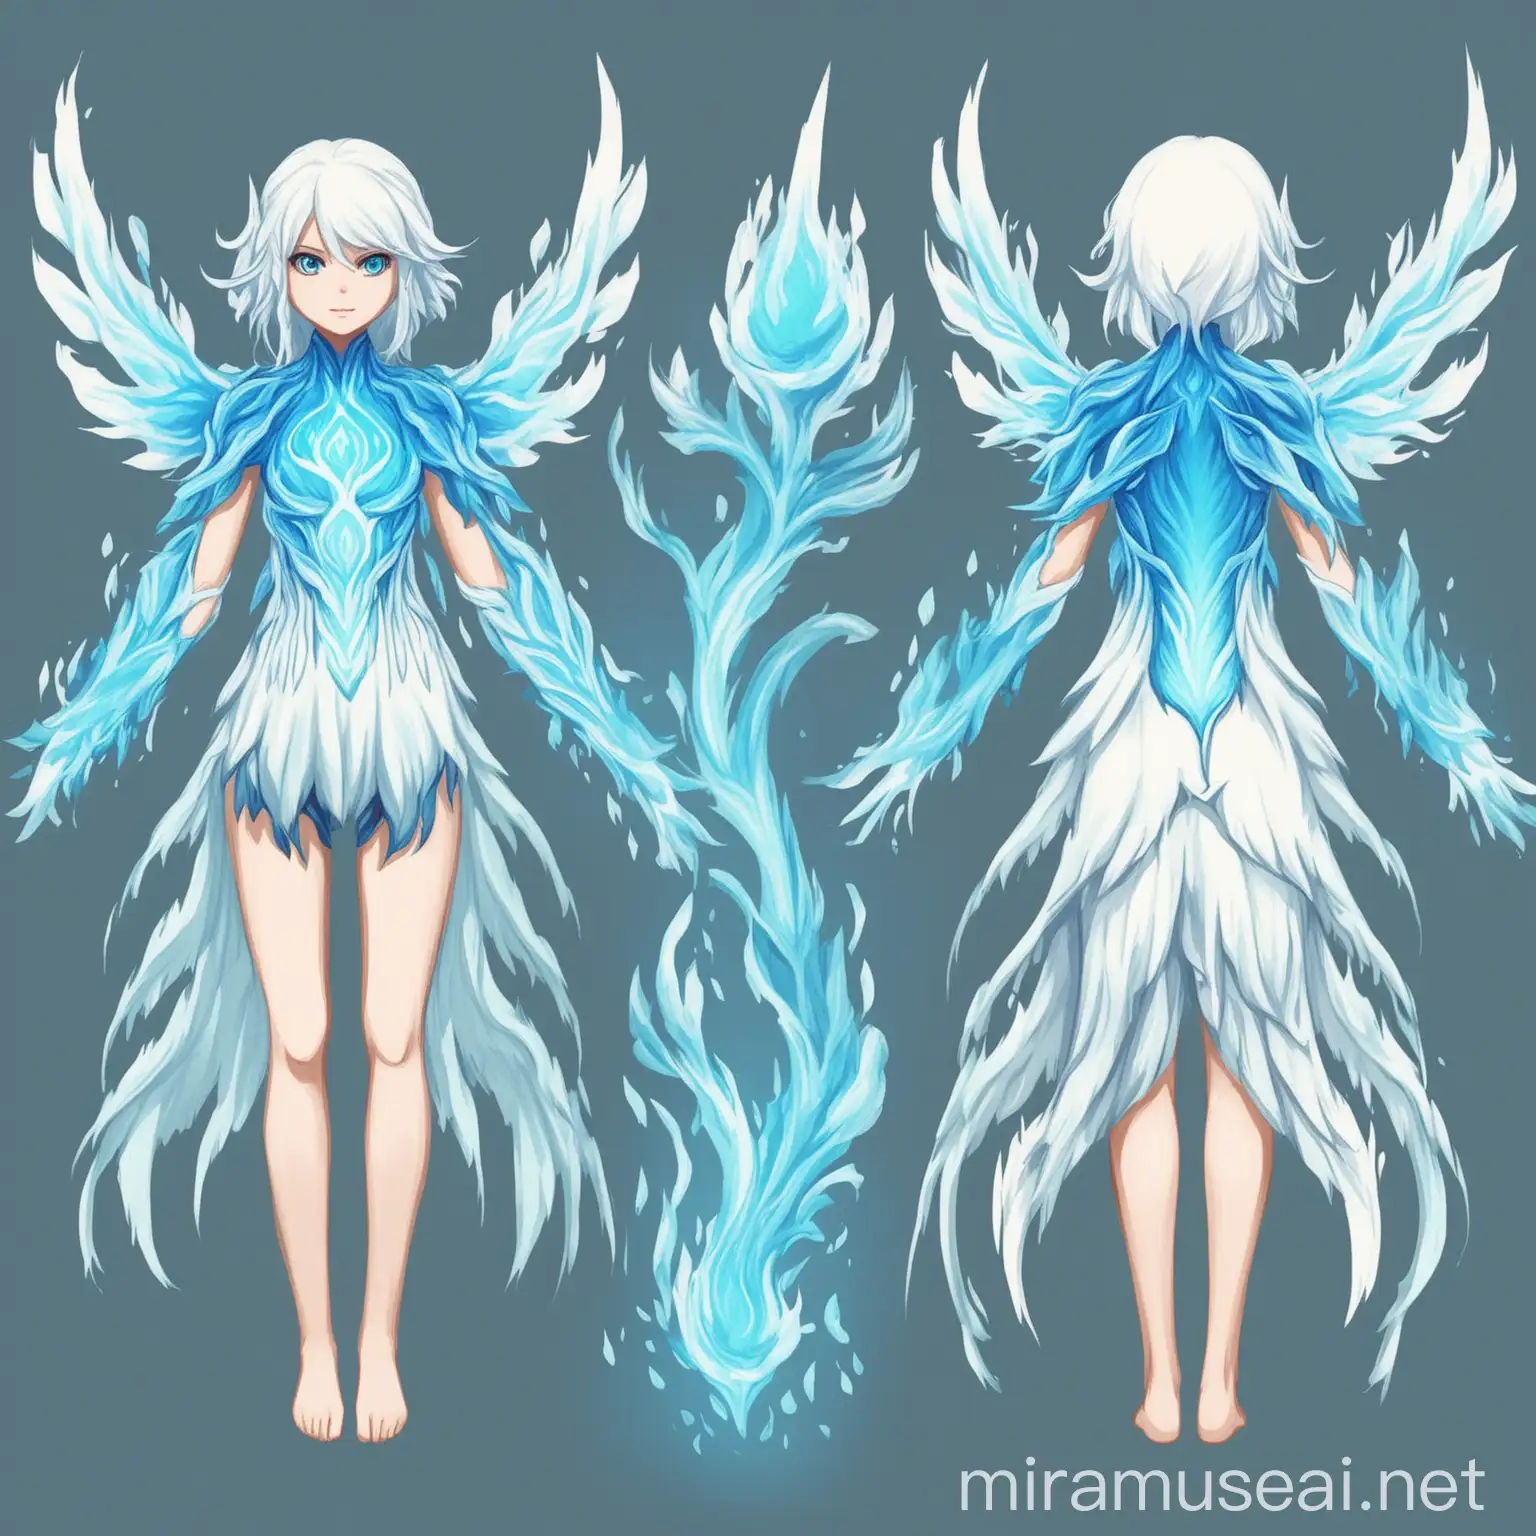 Ethereal Female Air Elemental with Flowing White Hair